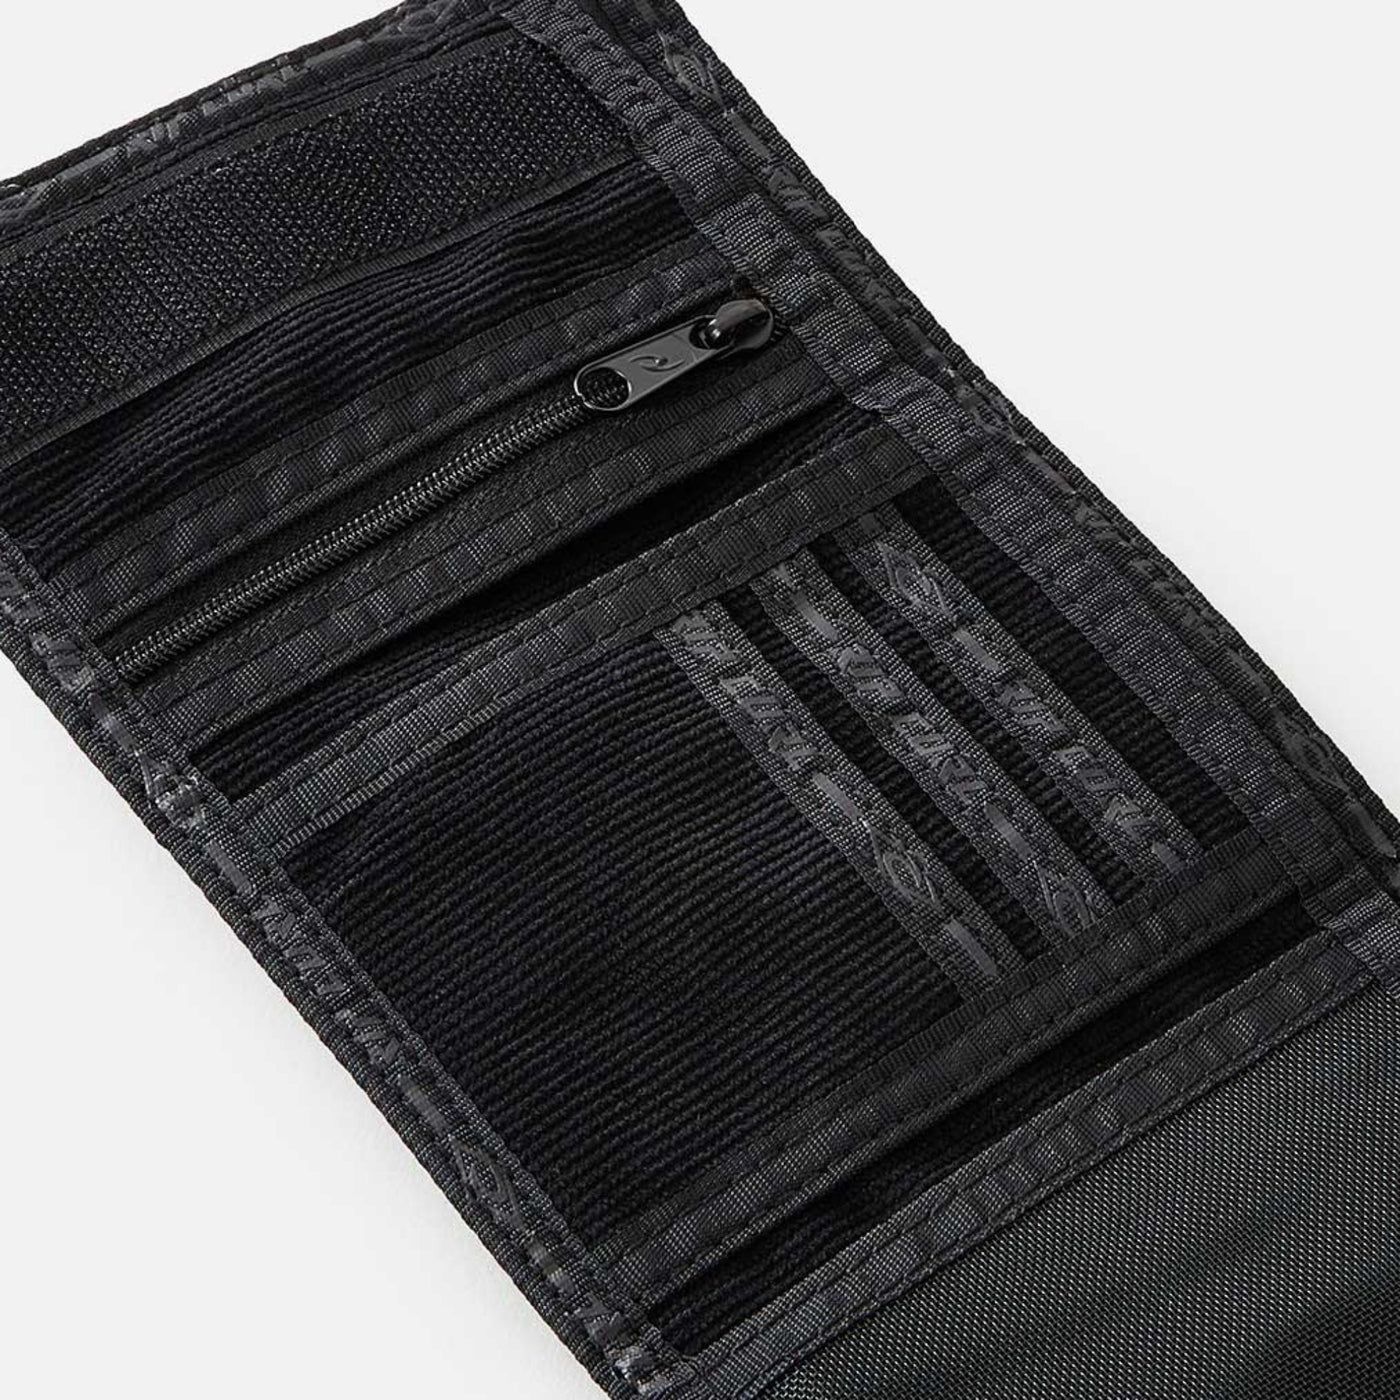 Rip Curl Archive Cord Surf Wallet - Black